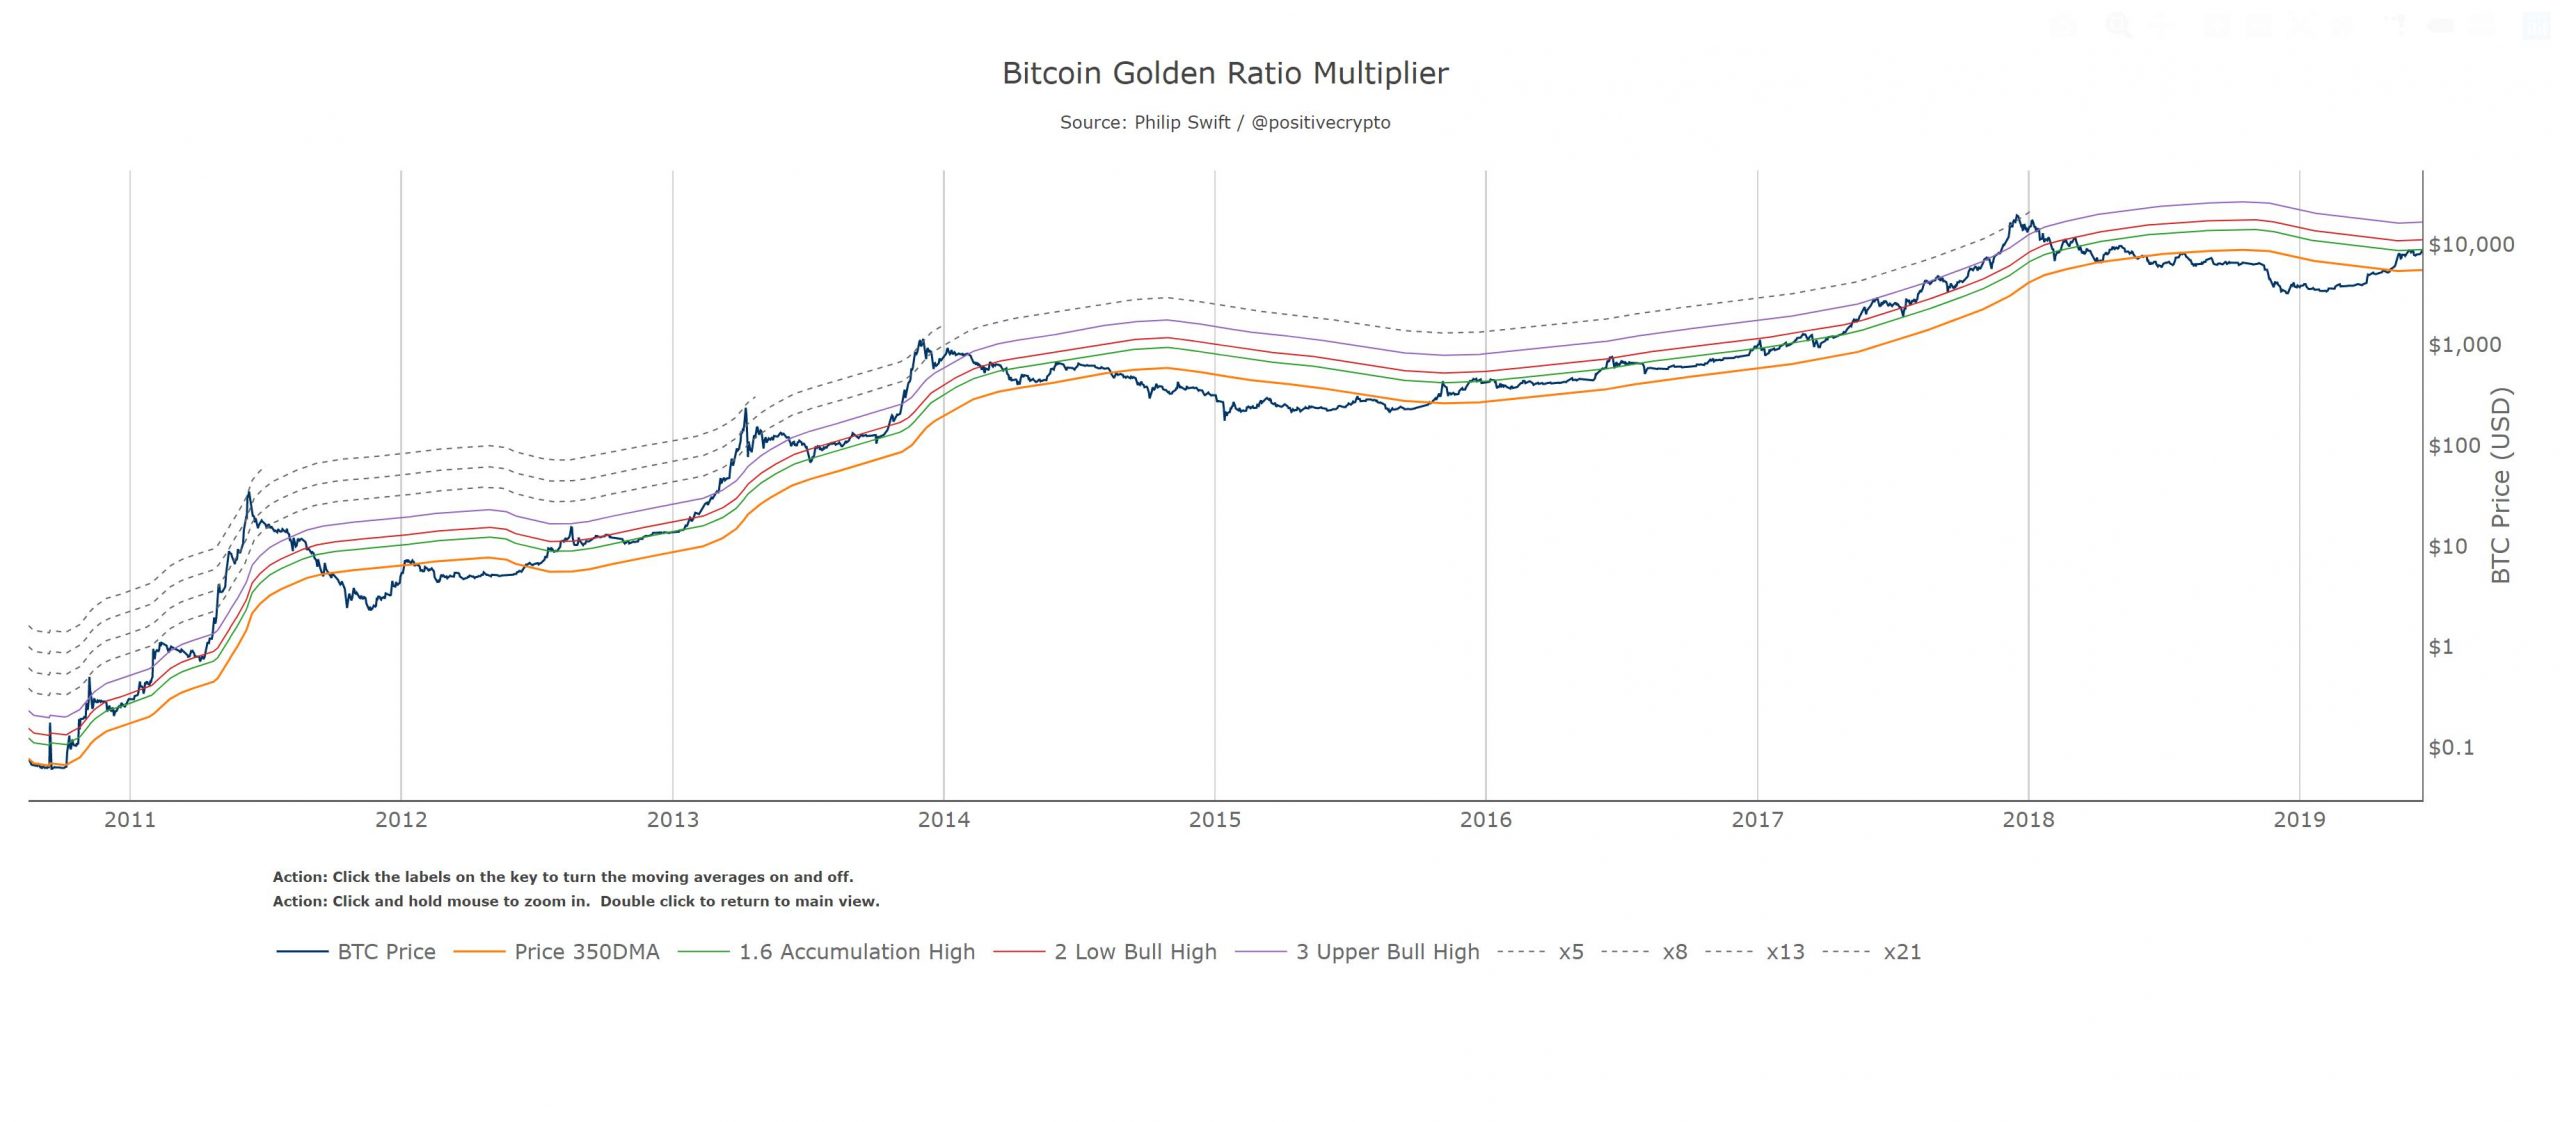 Spiral Out — Using the Golden Ratio and Fibonacci sequence to Predict Bitcoin Price Cycles